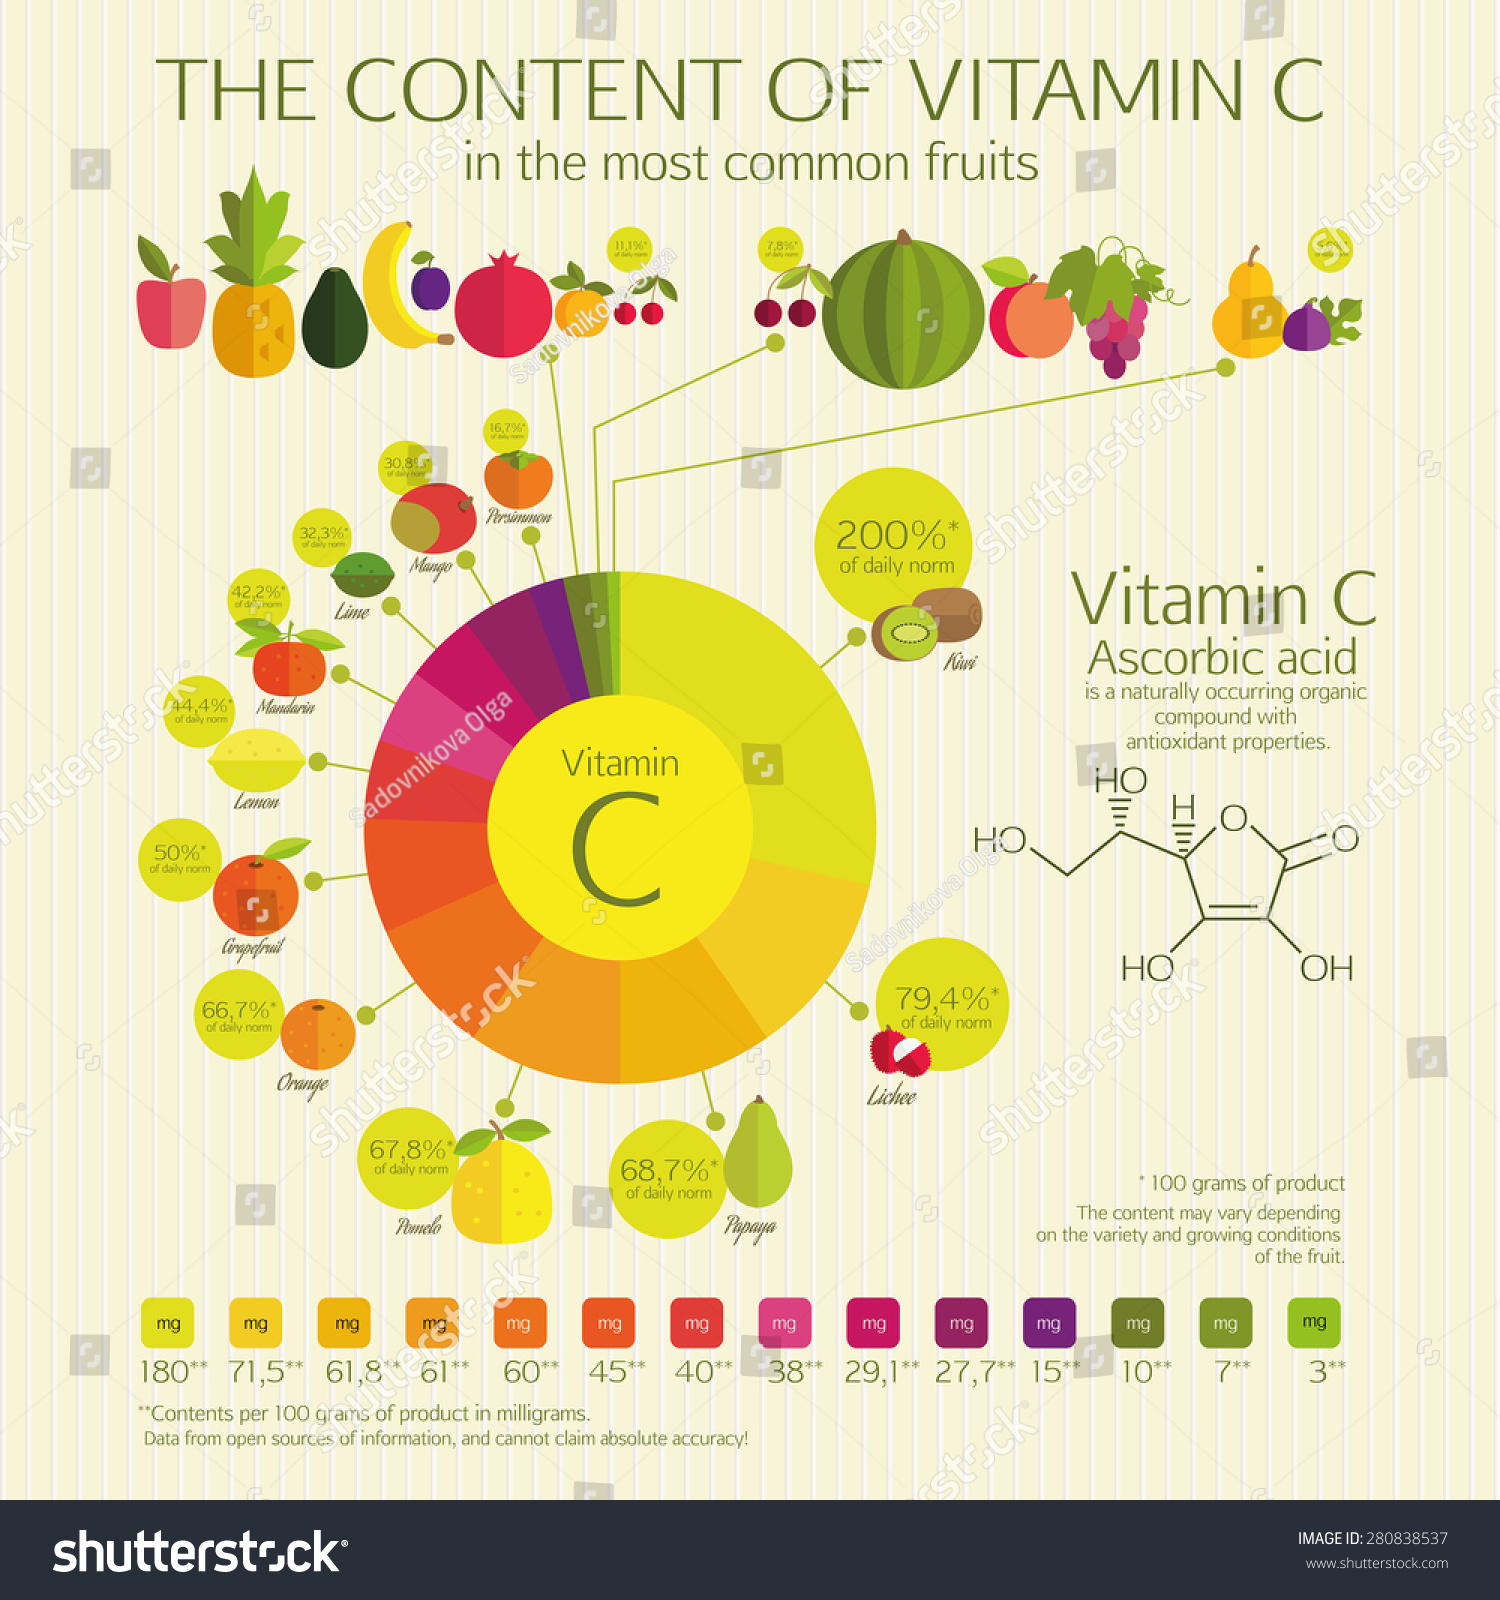 Healthy Foods that Contain Vitamin C